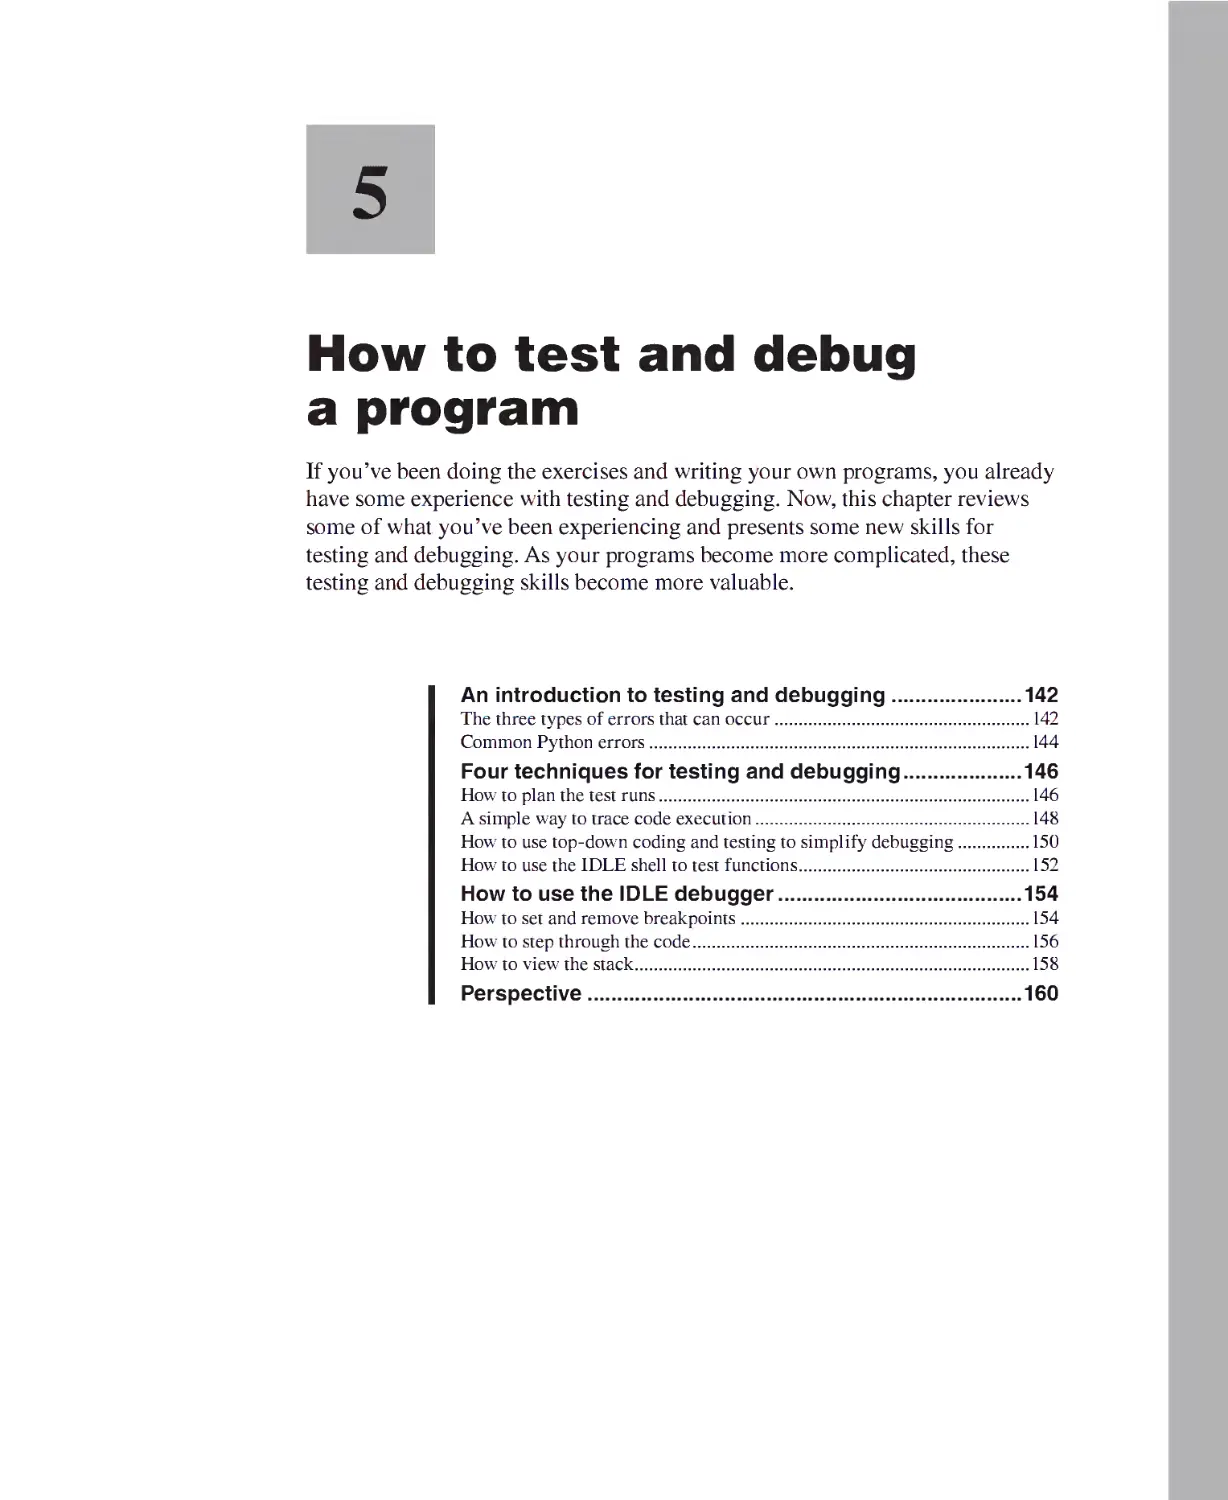 Chapter 5 - How to Test and Debug a Program